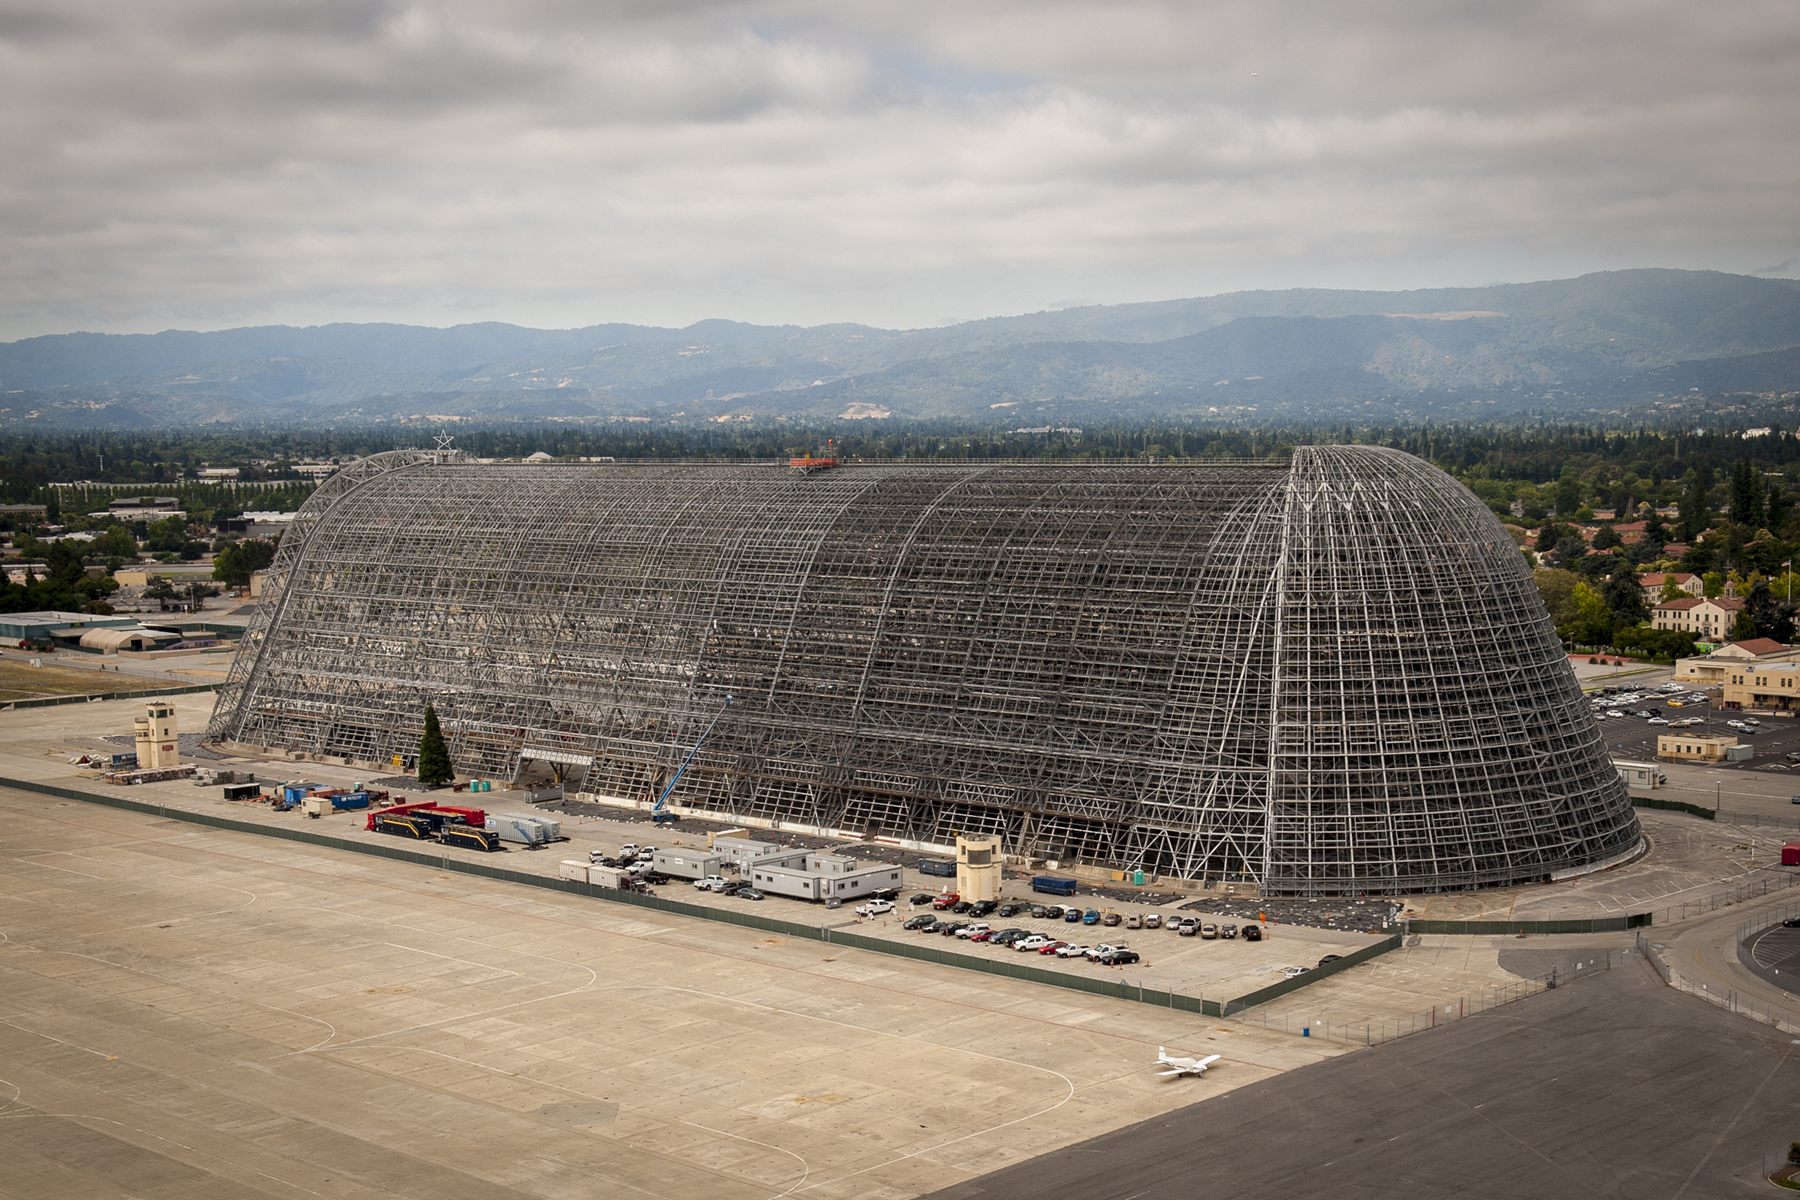 A birds-eye-view of Hangar 1 with all of its exterior metal panels removed and its entire enormous steel structure completely exposed.